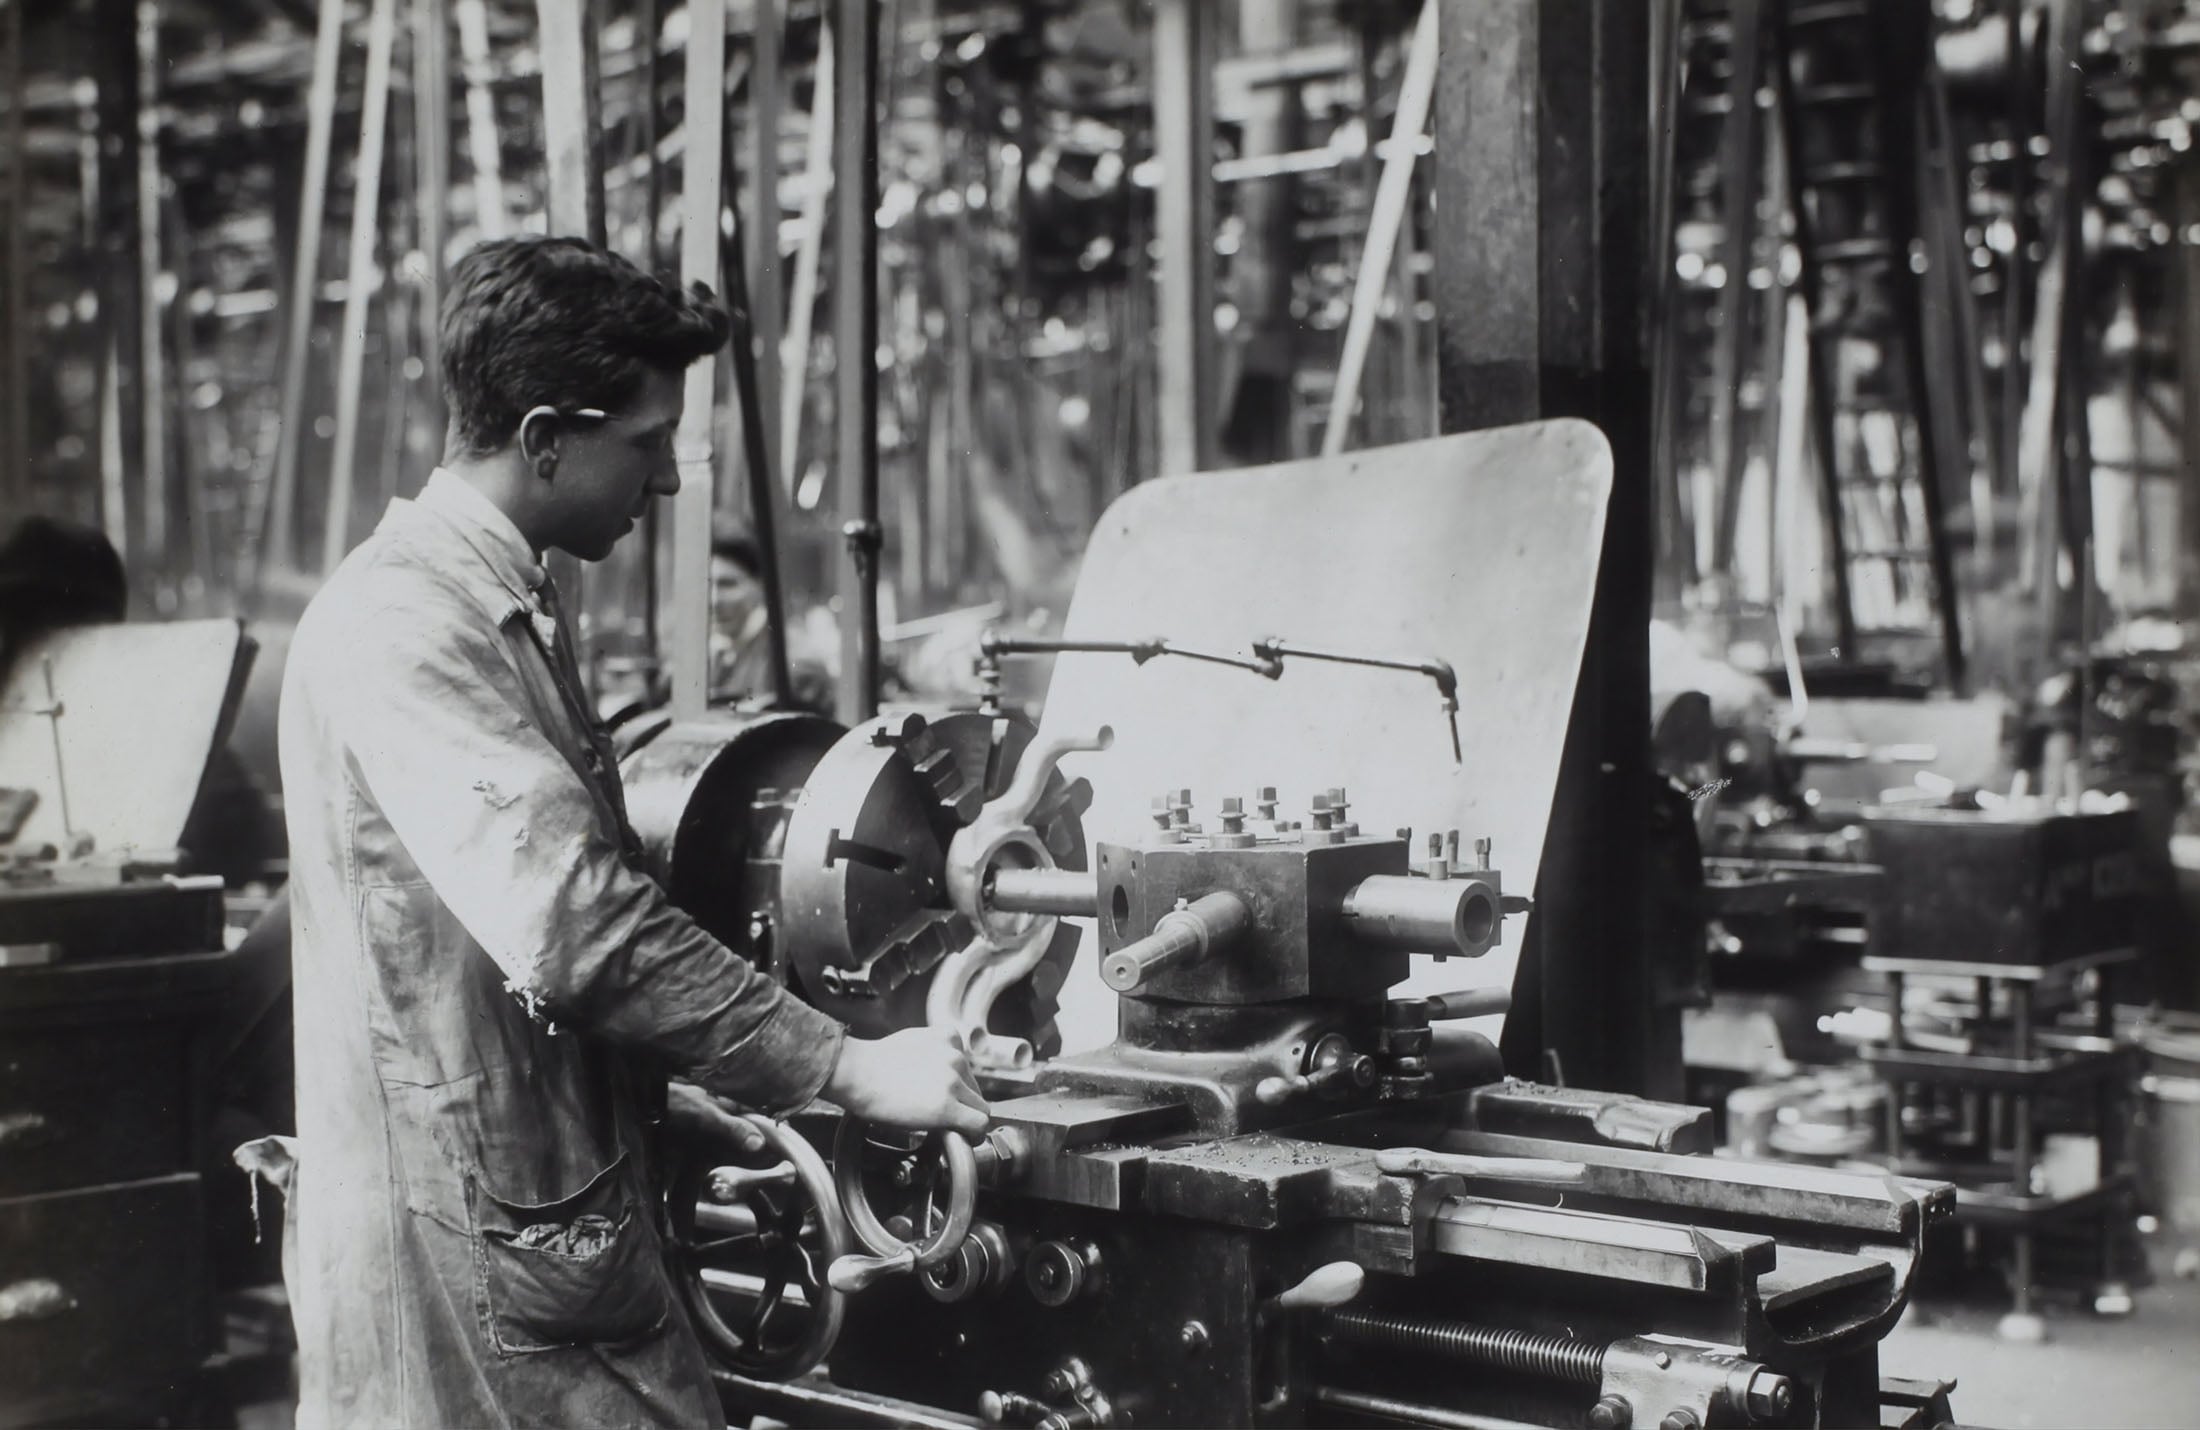 Where were you when the machinery industry went digital?